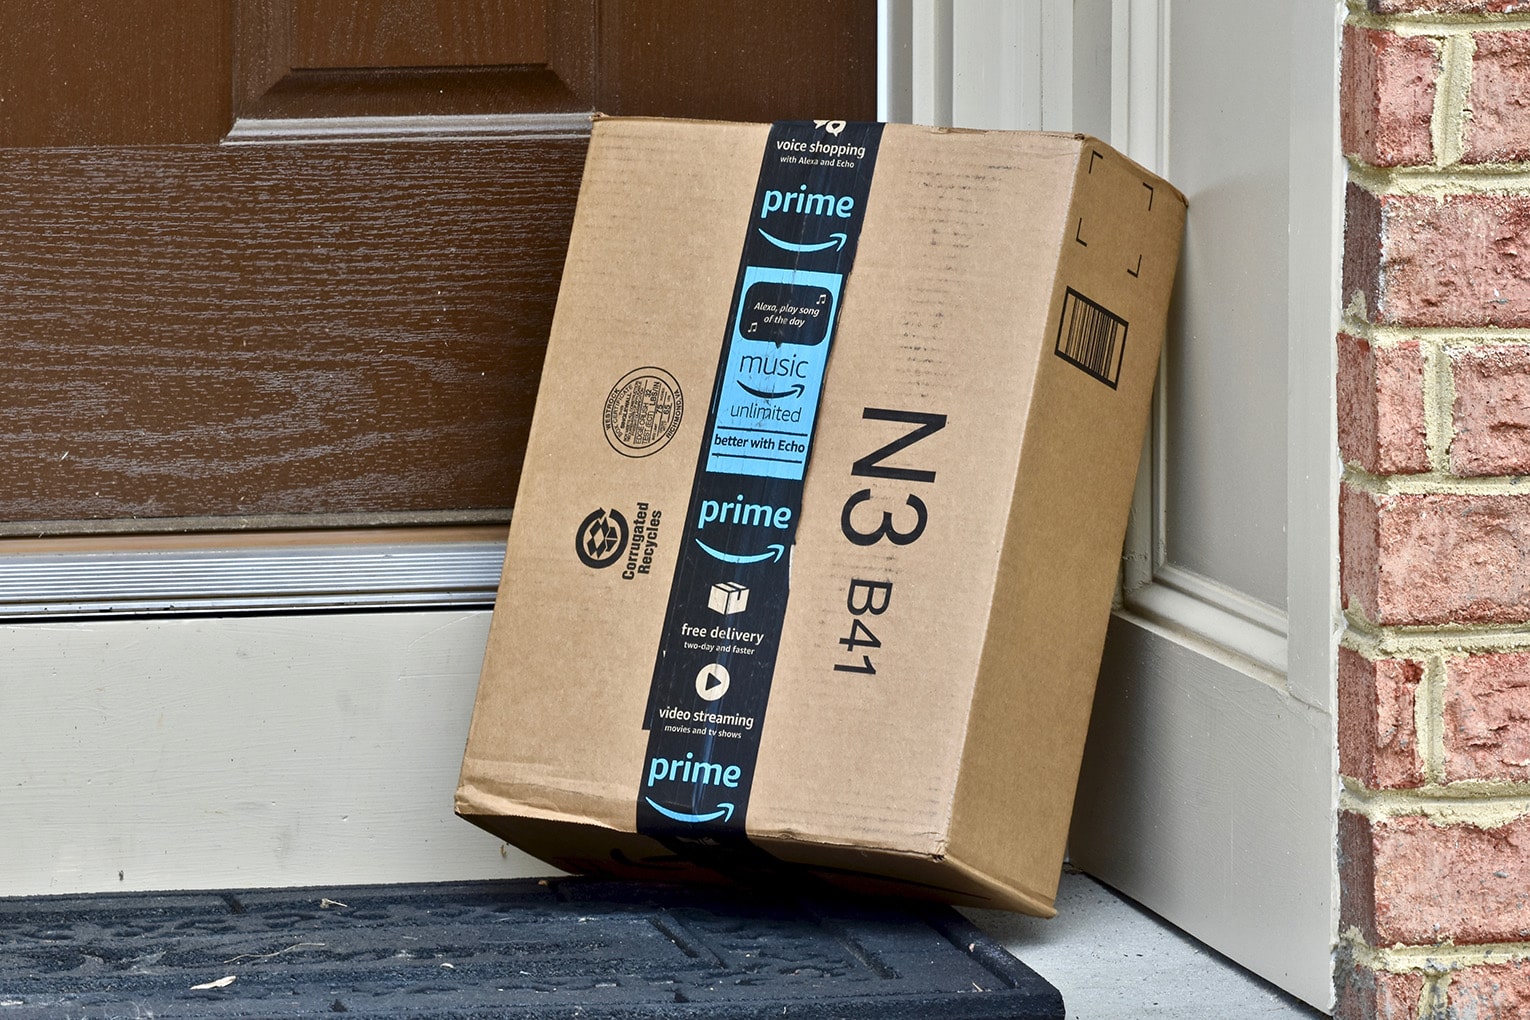 Amazon’s Results Highlight Marketplace, Prime and One Day